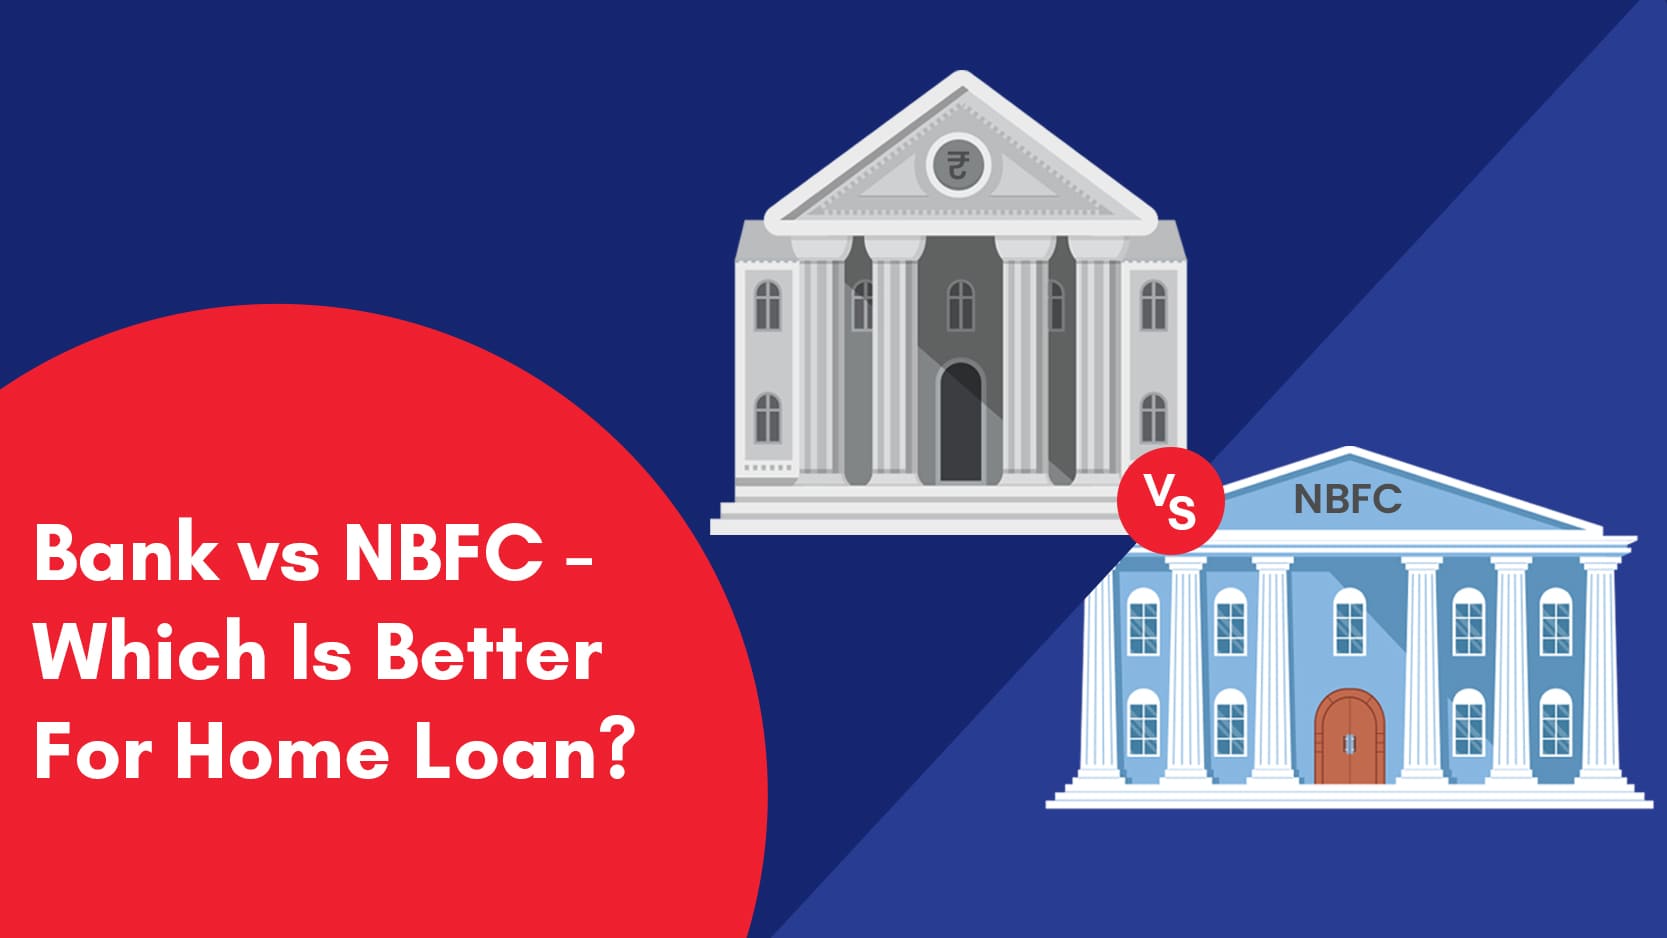 Bank vs. NBFC - Which Is the Better Choice for Your Home Loan?